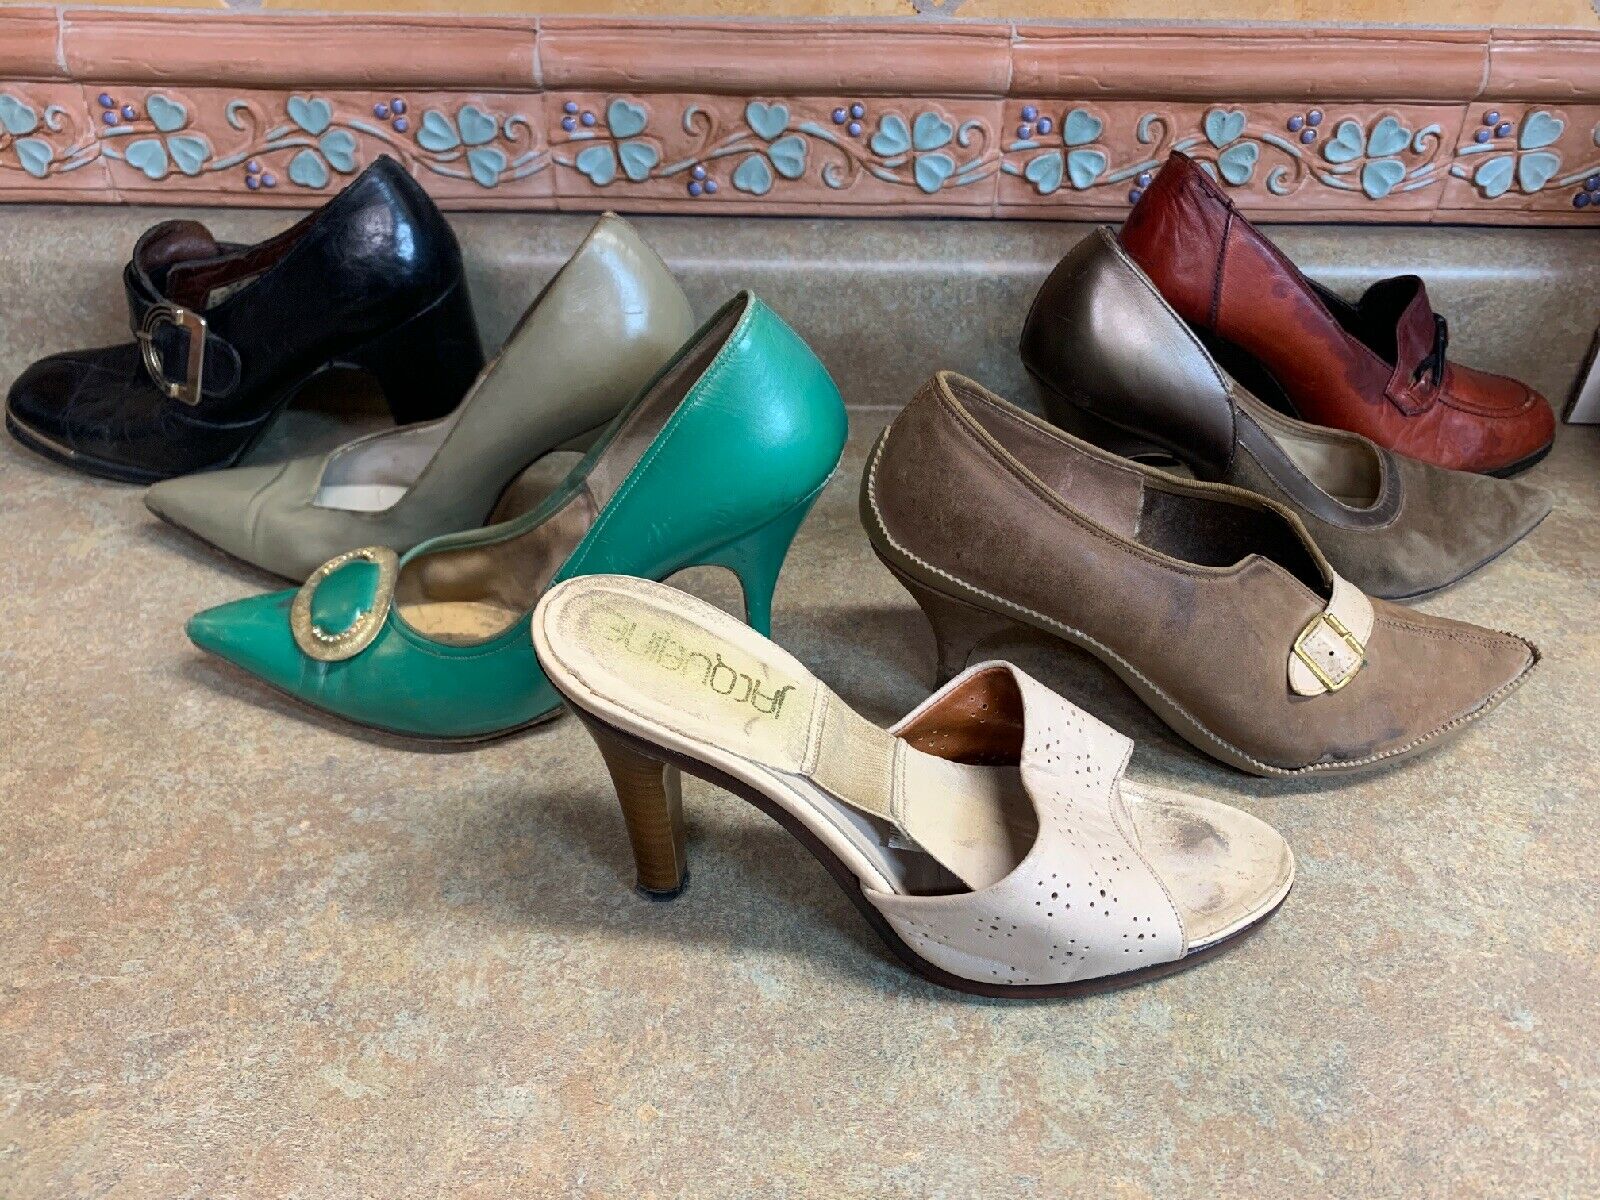 Vintage Womens Dress Shoes Size 6 Lot Of 7 Pair Heels Old As Is